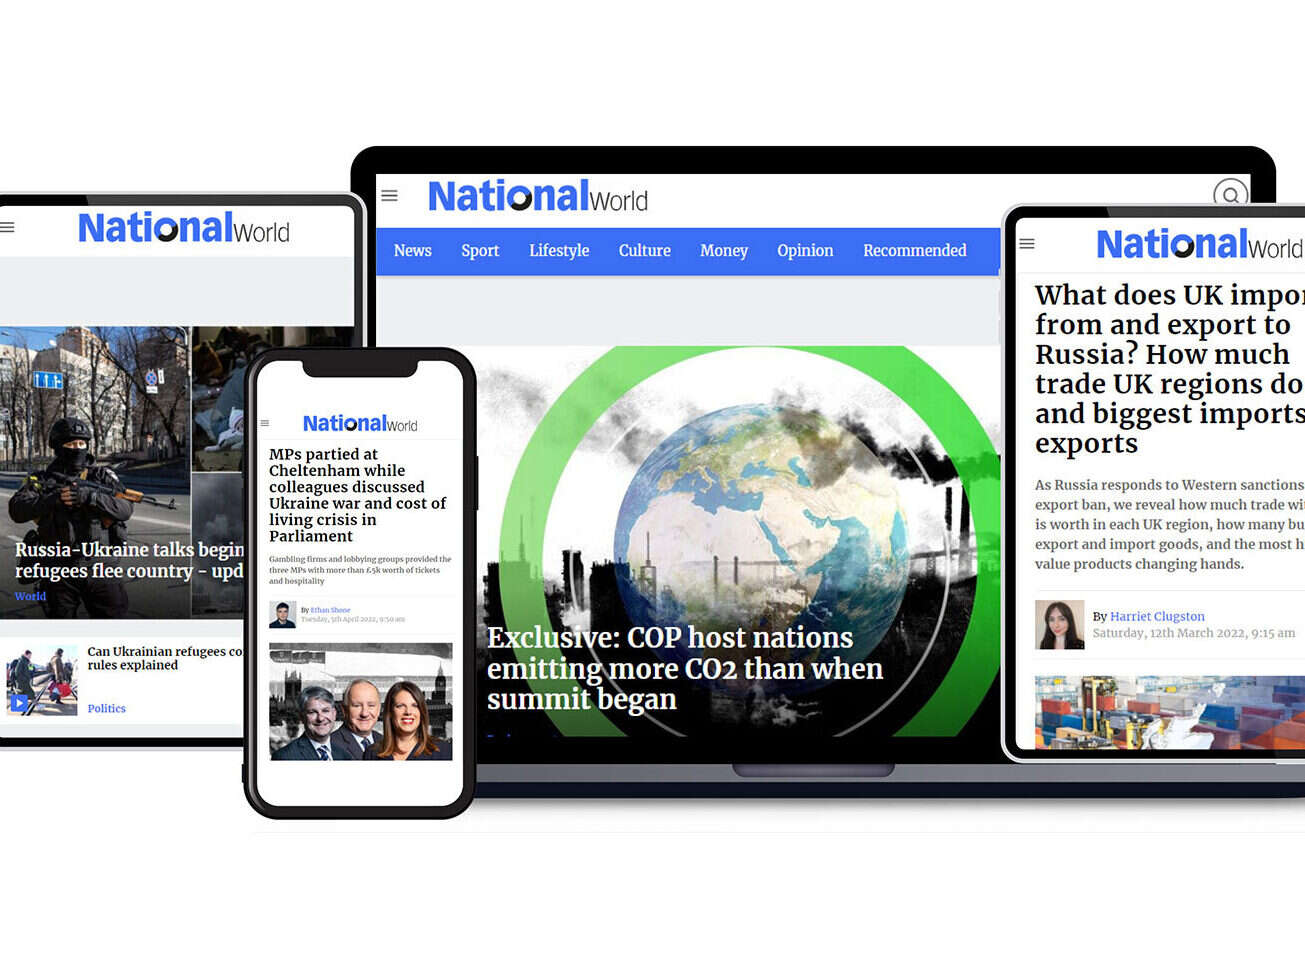 National World becomes JPI Media's biggest website in a year with 20 million monthly page views